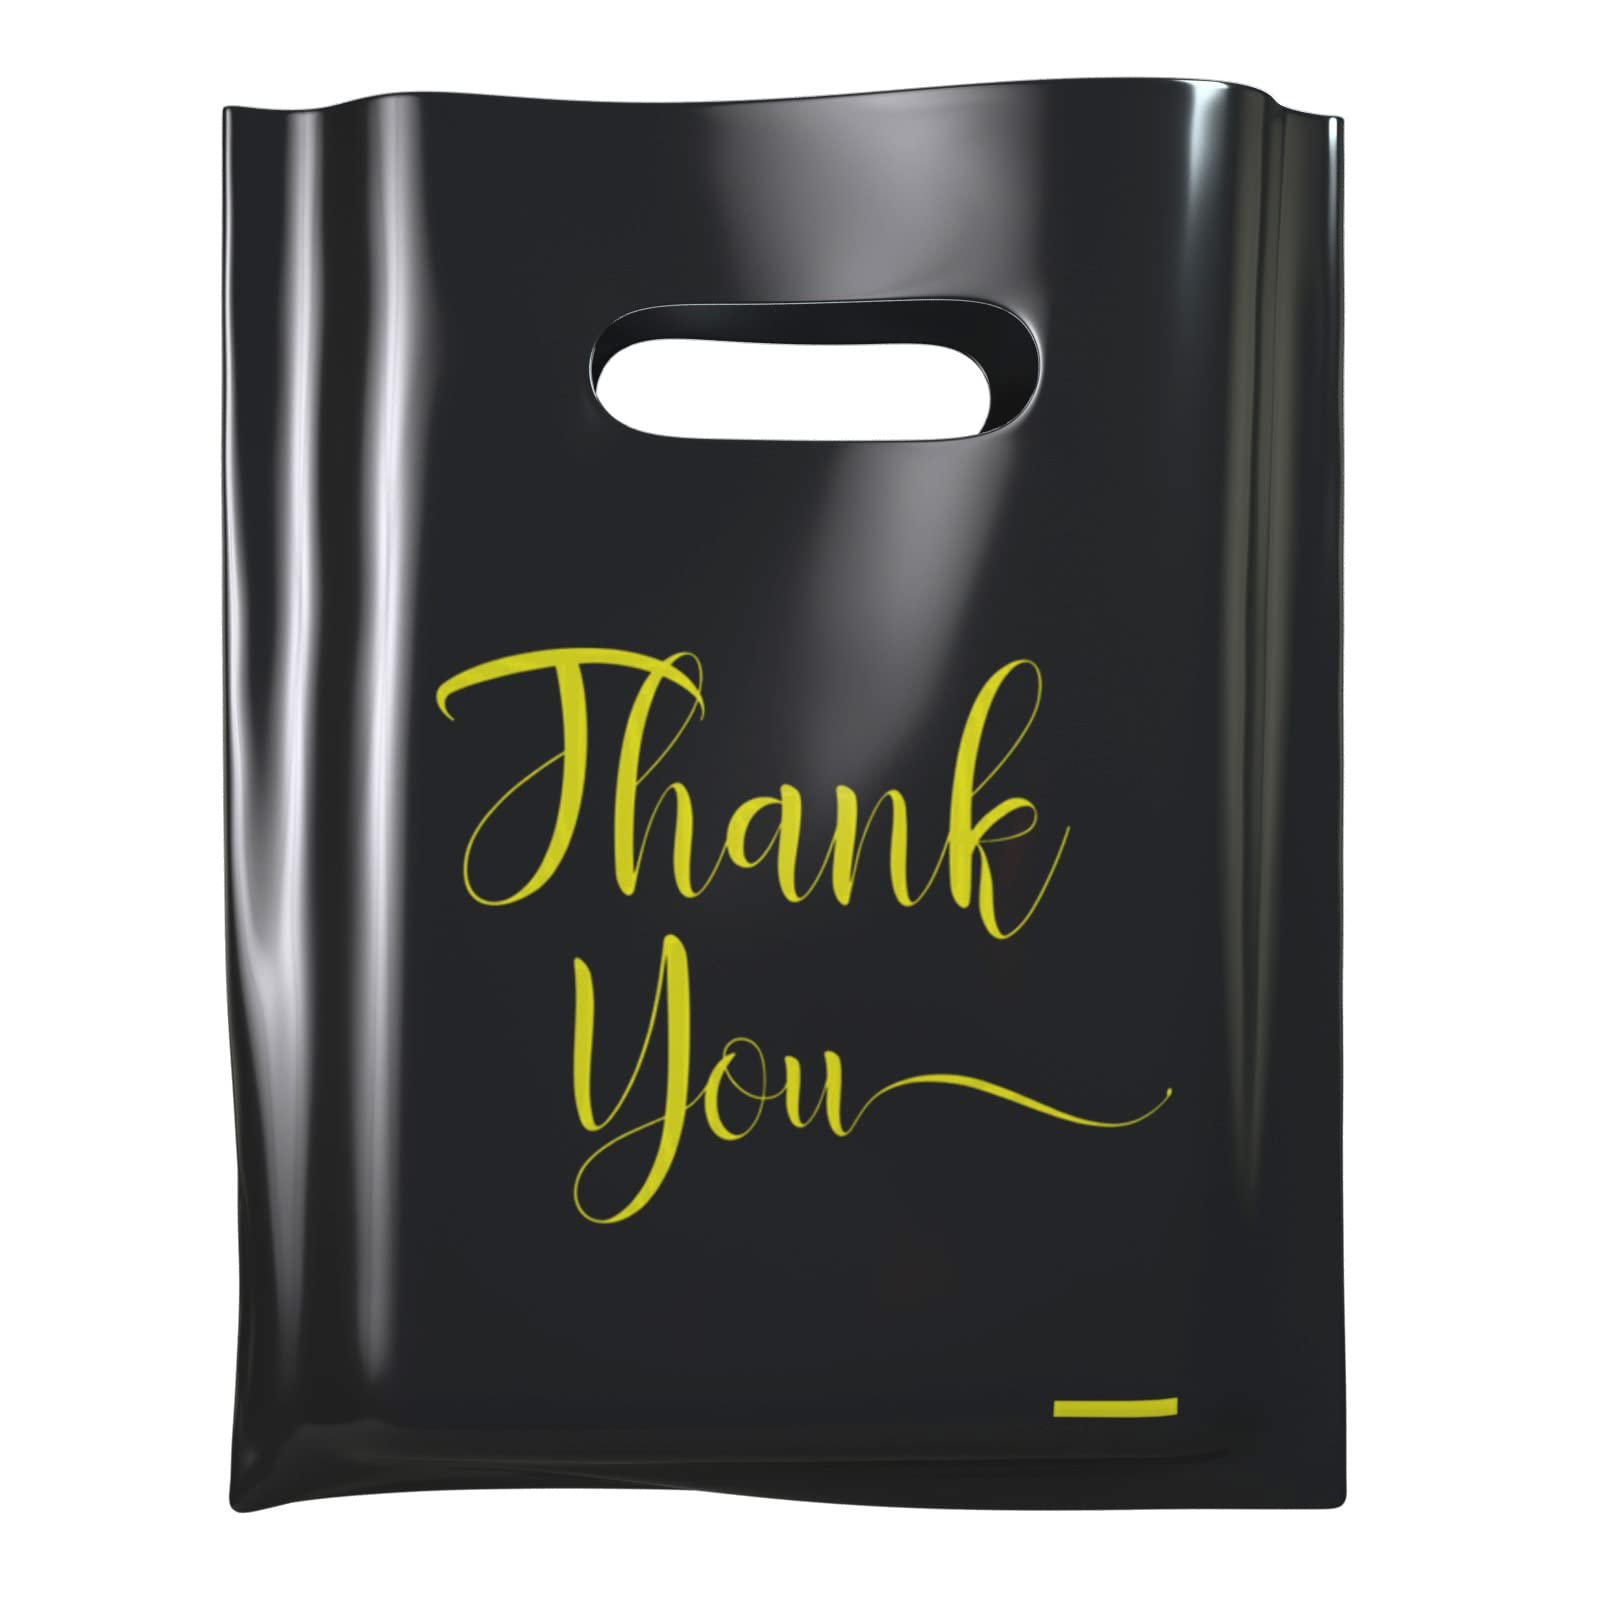 Thank You Bags for Business, 100 Stück Bulk Plastic Merchandise Bags for Packaging Products Extra Thick Shopping Bags for Boutique Small Gift Bags for Retail Wholesale (Large (38.1x45.7 cm), Schwarz)